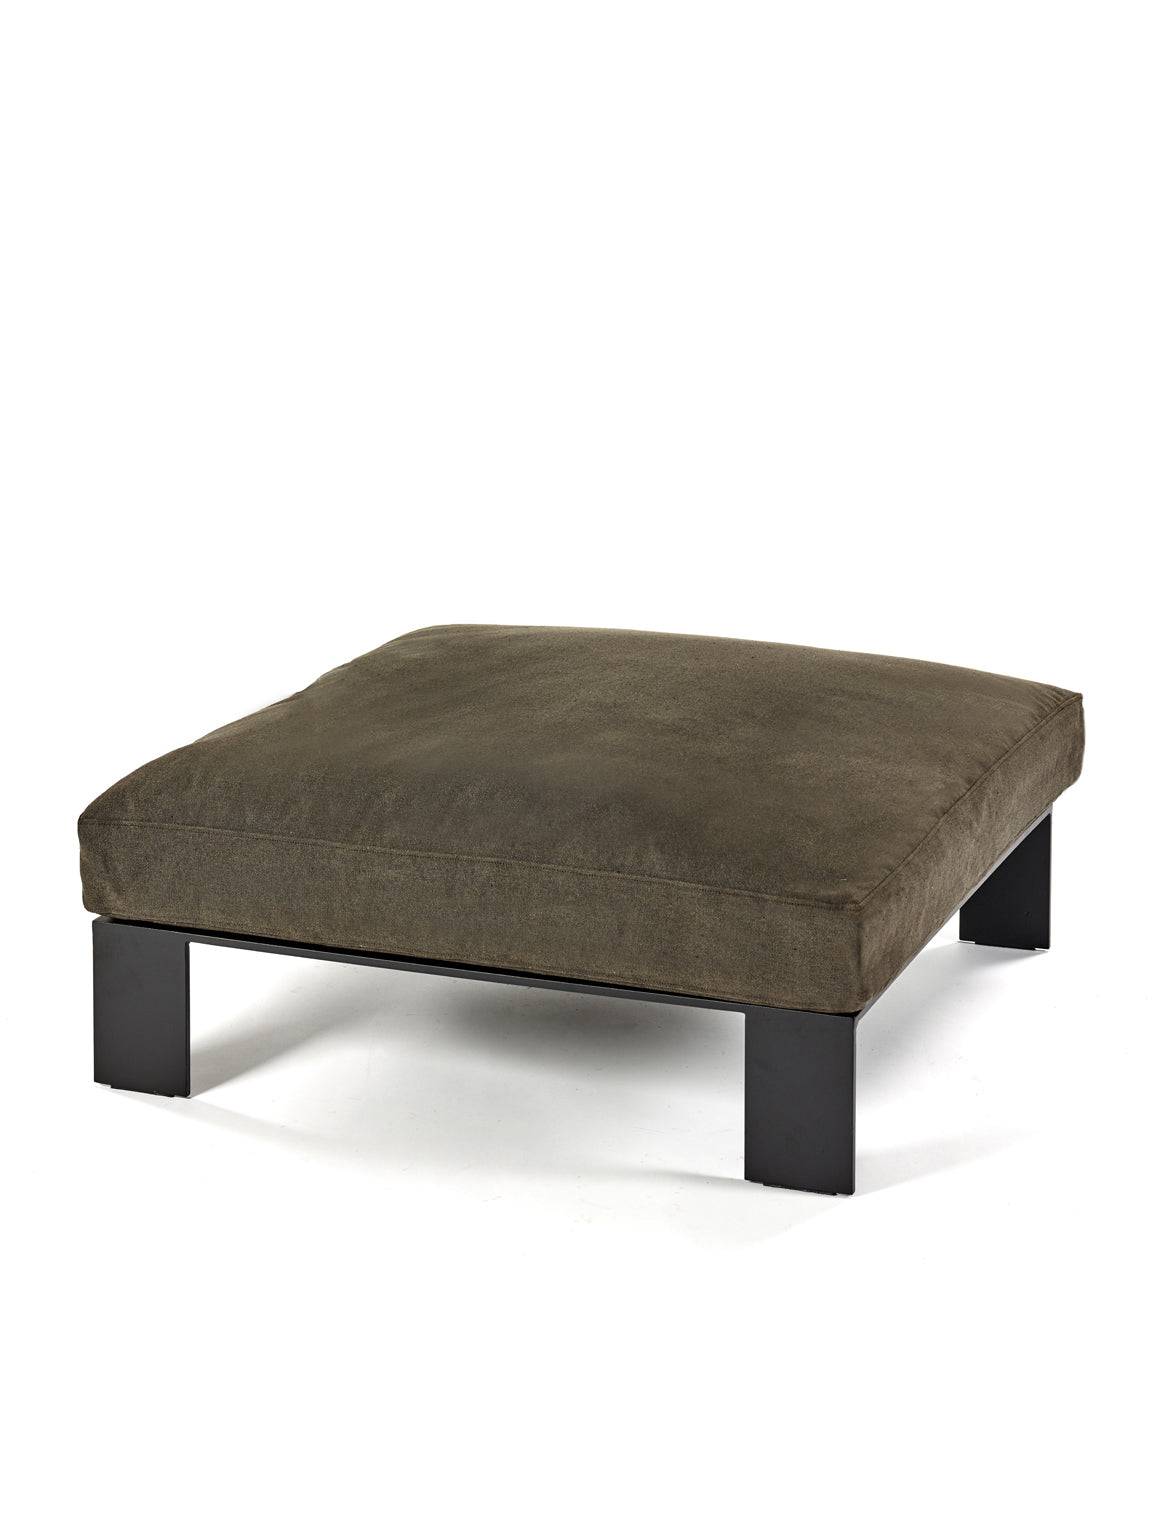 Mombaers Outdoor Ottoman - Umber - THAT COOL LIVING